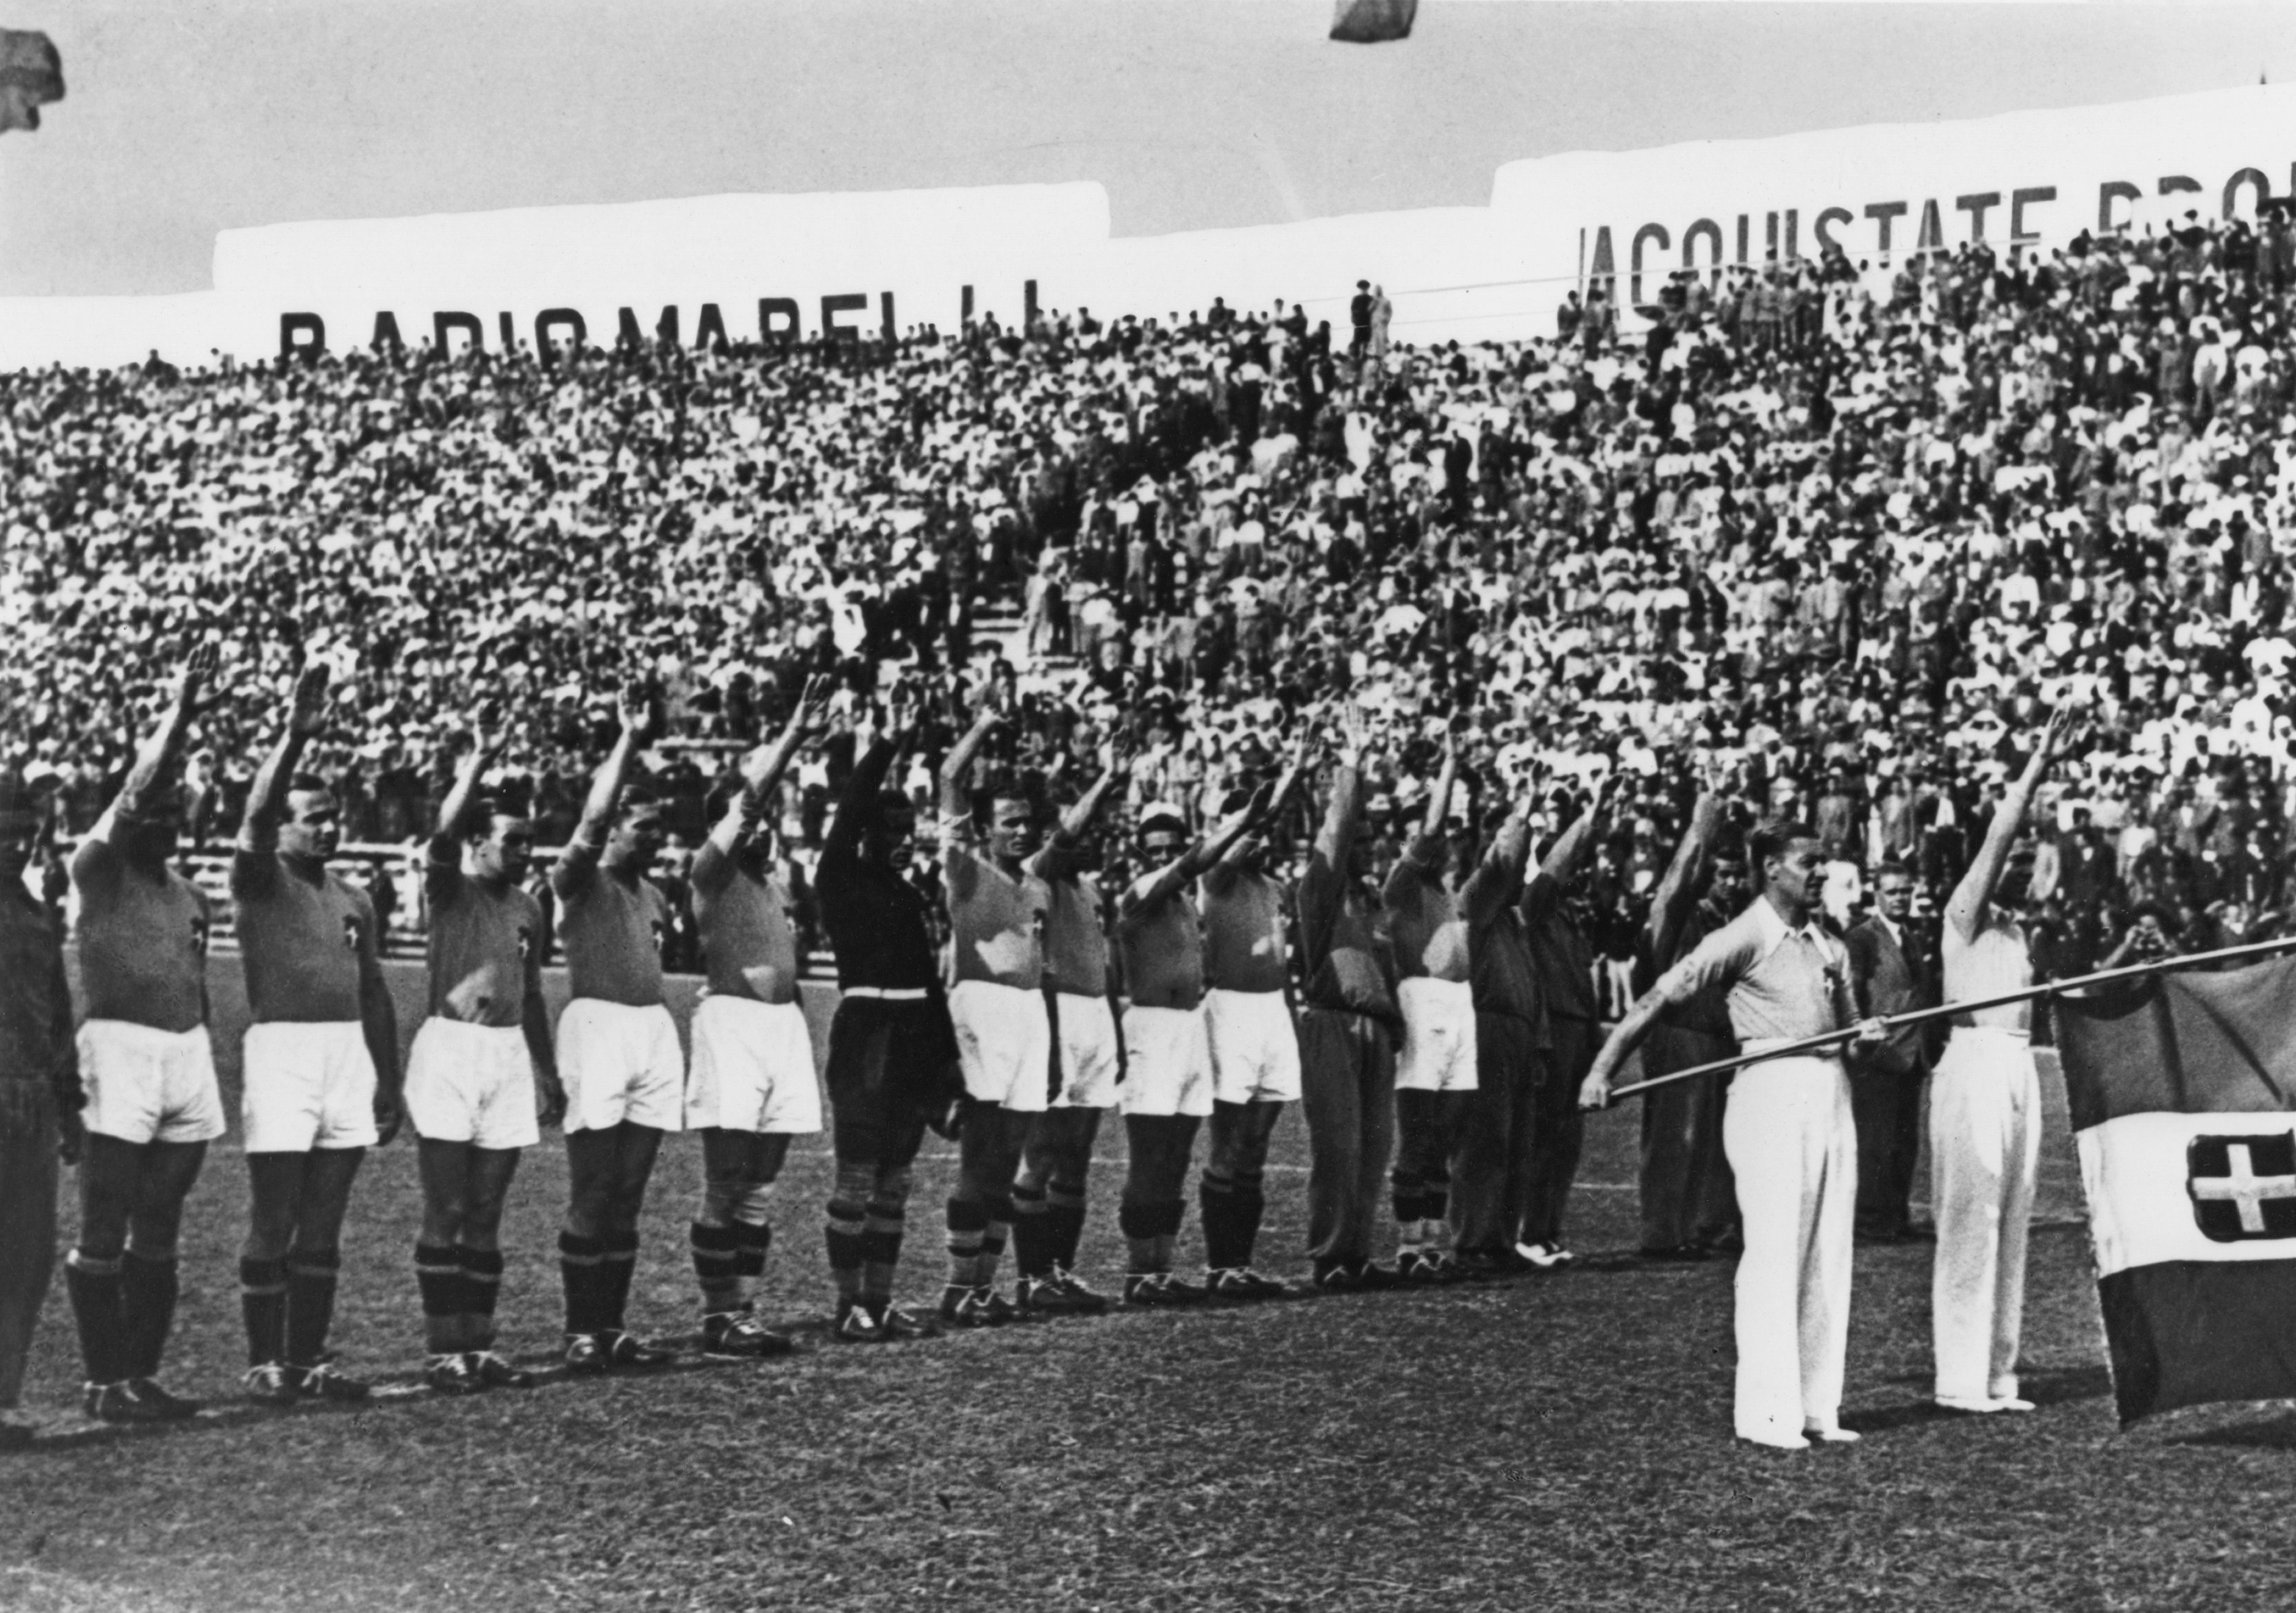 The Italian team performing a fascist salute before the 1934 World Cup Final in Rome, June 10, 1934. Photo credit: Keystone/Hulton Archive/Getty Images.